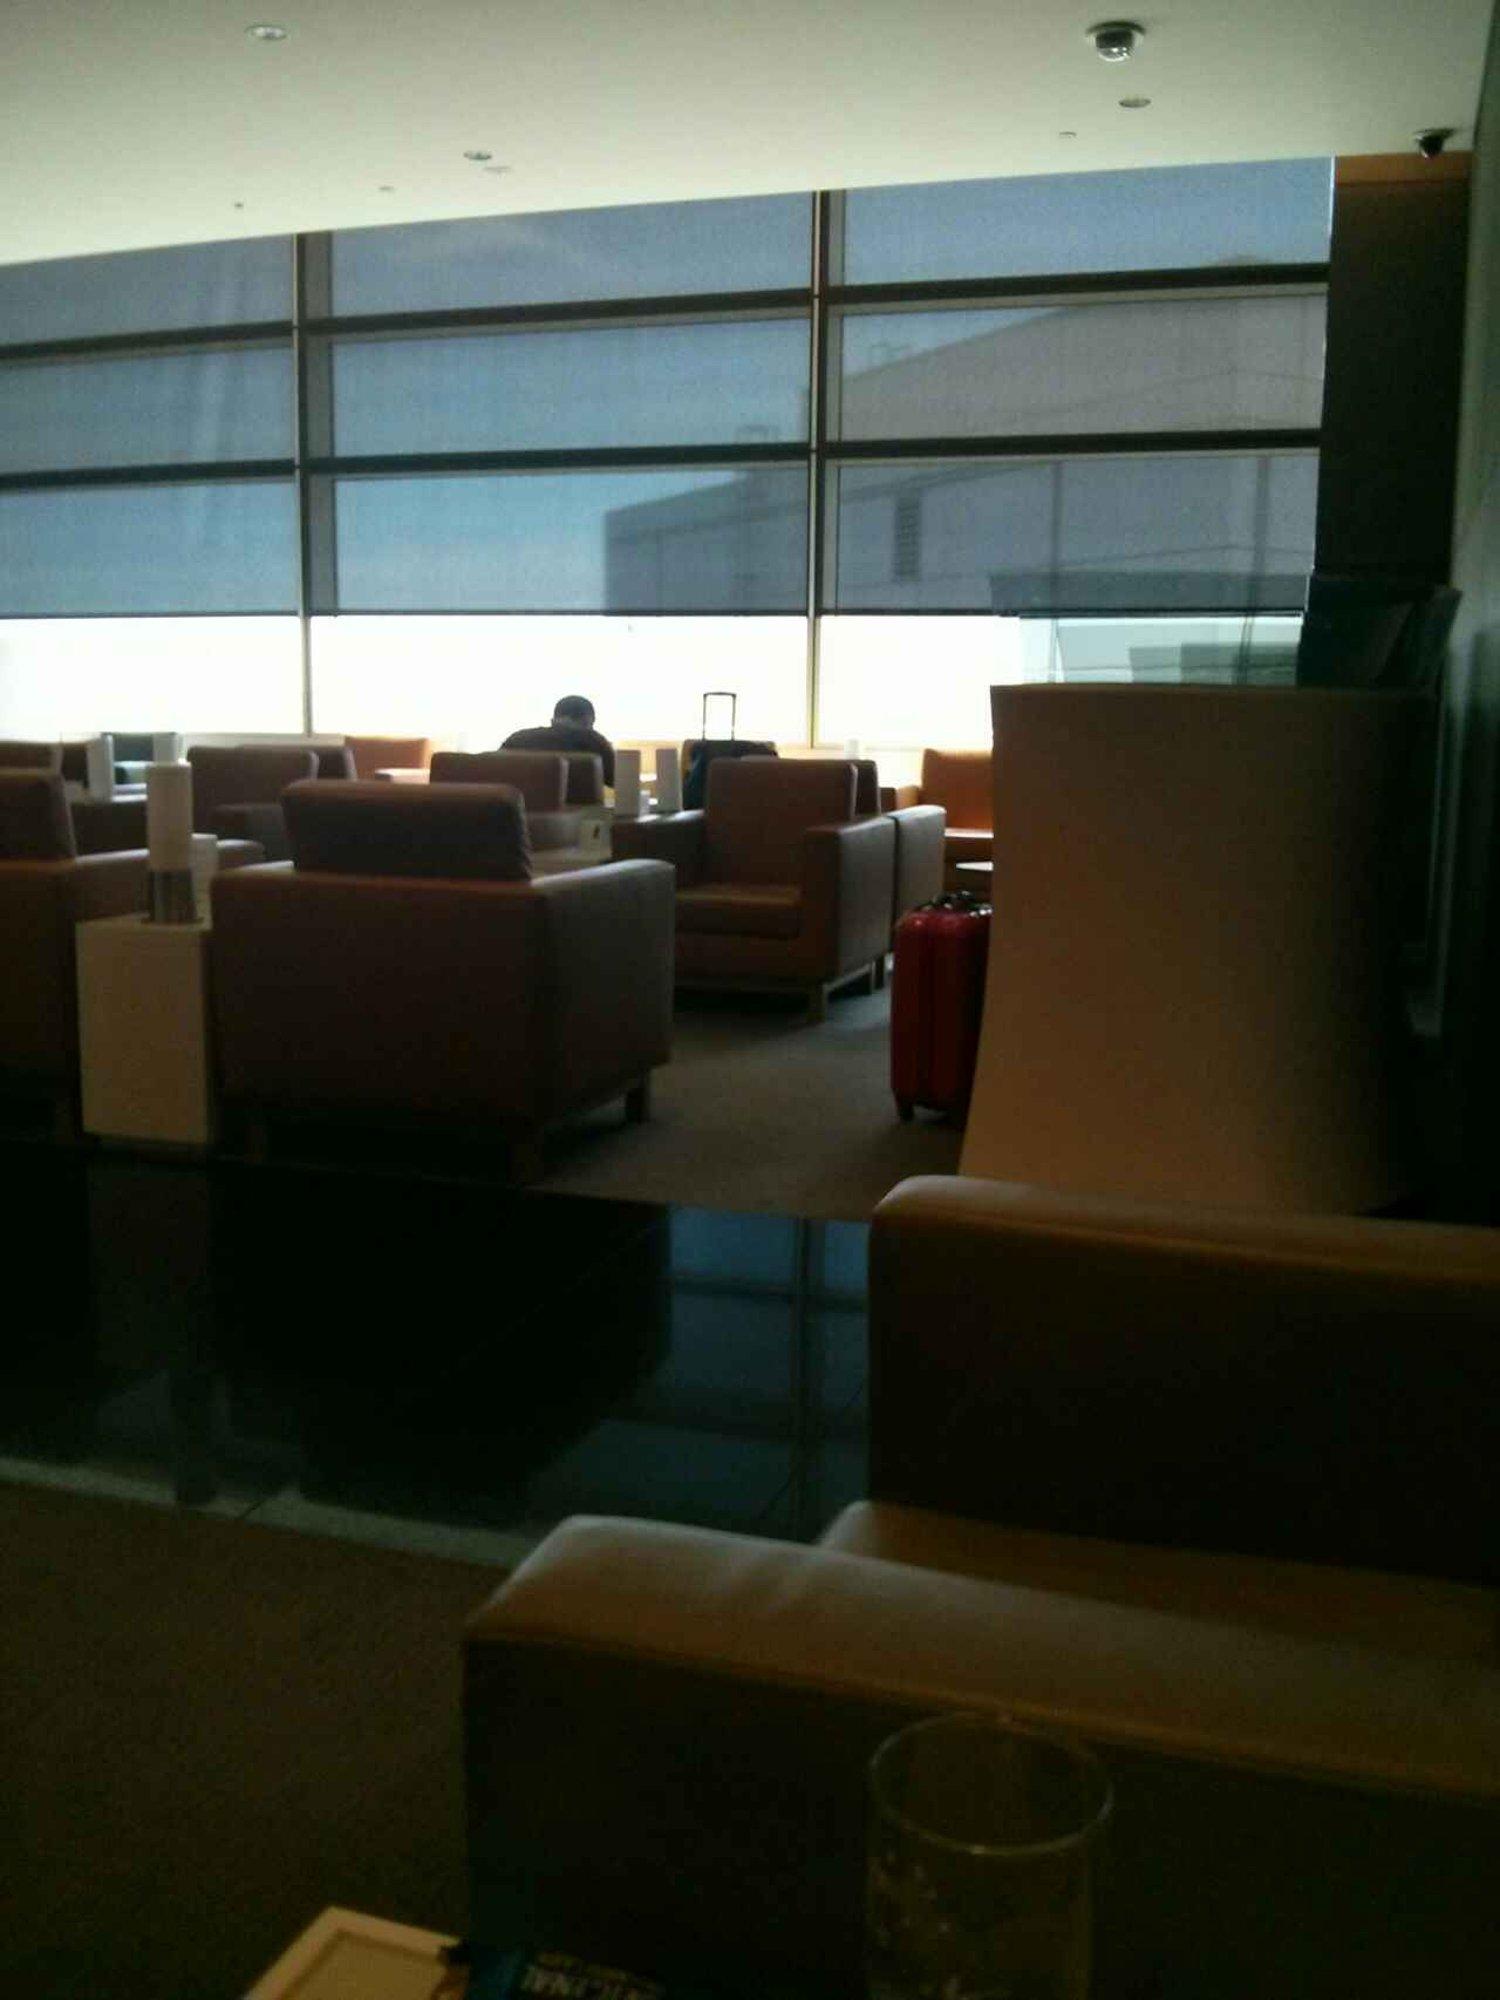 Cathay Pacific First and Business Class Lounge image 20 of 74